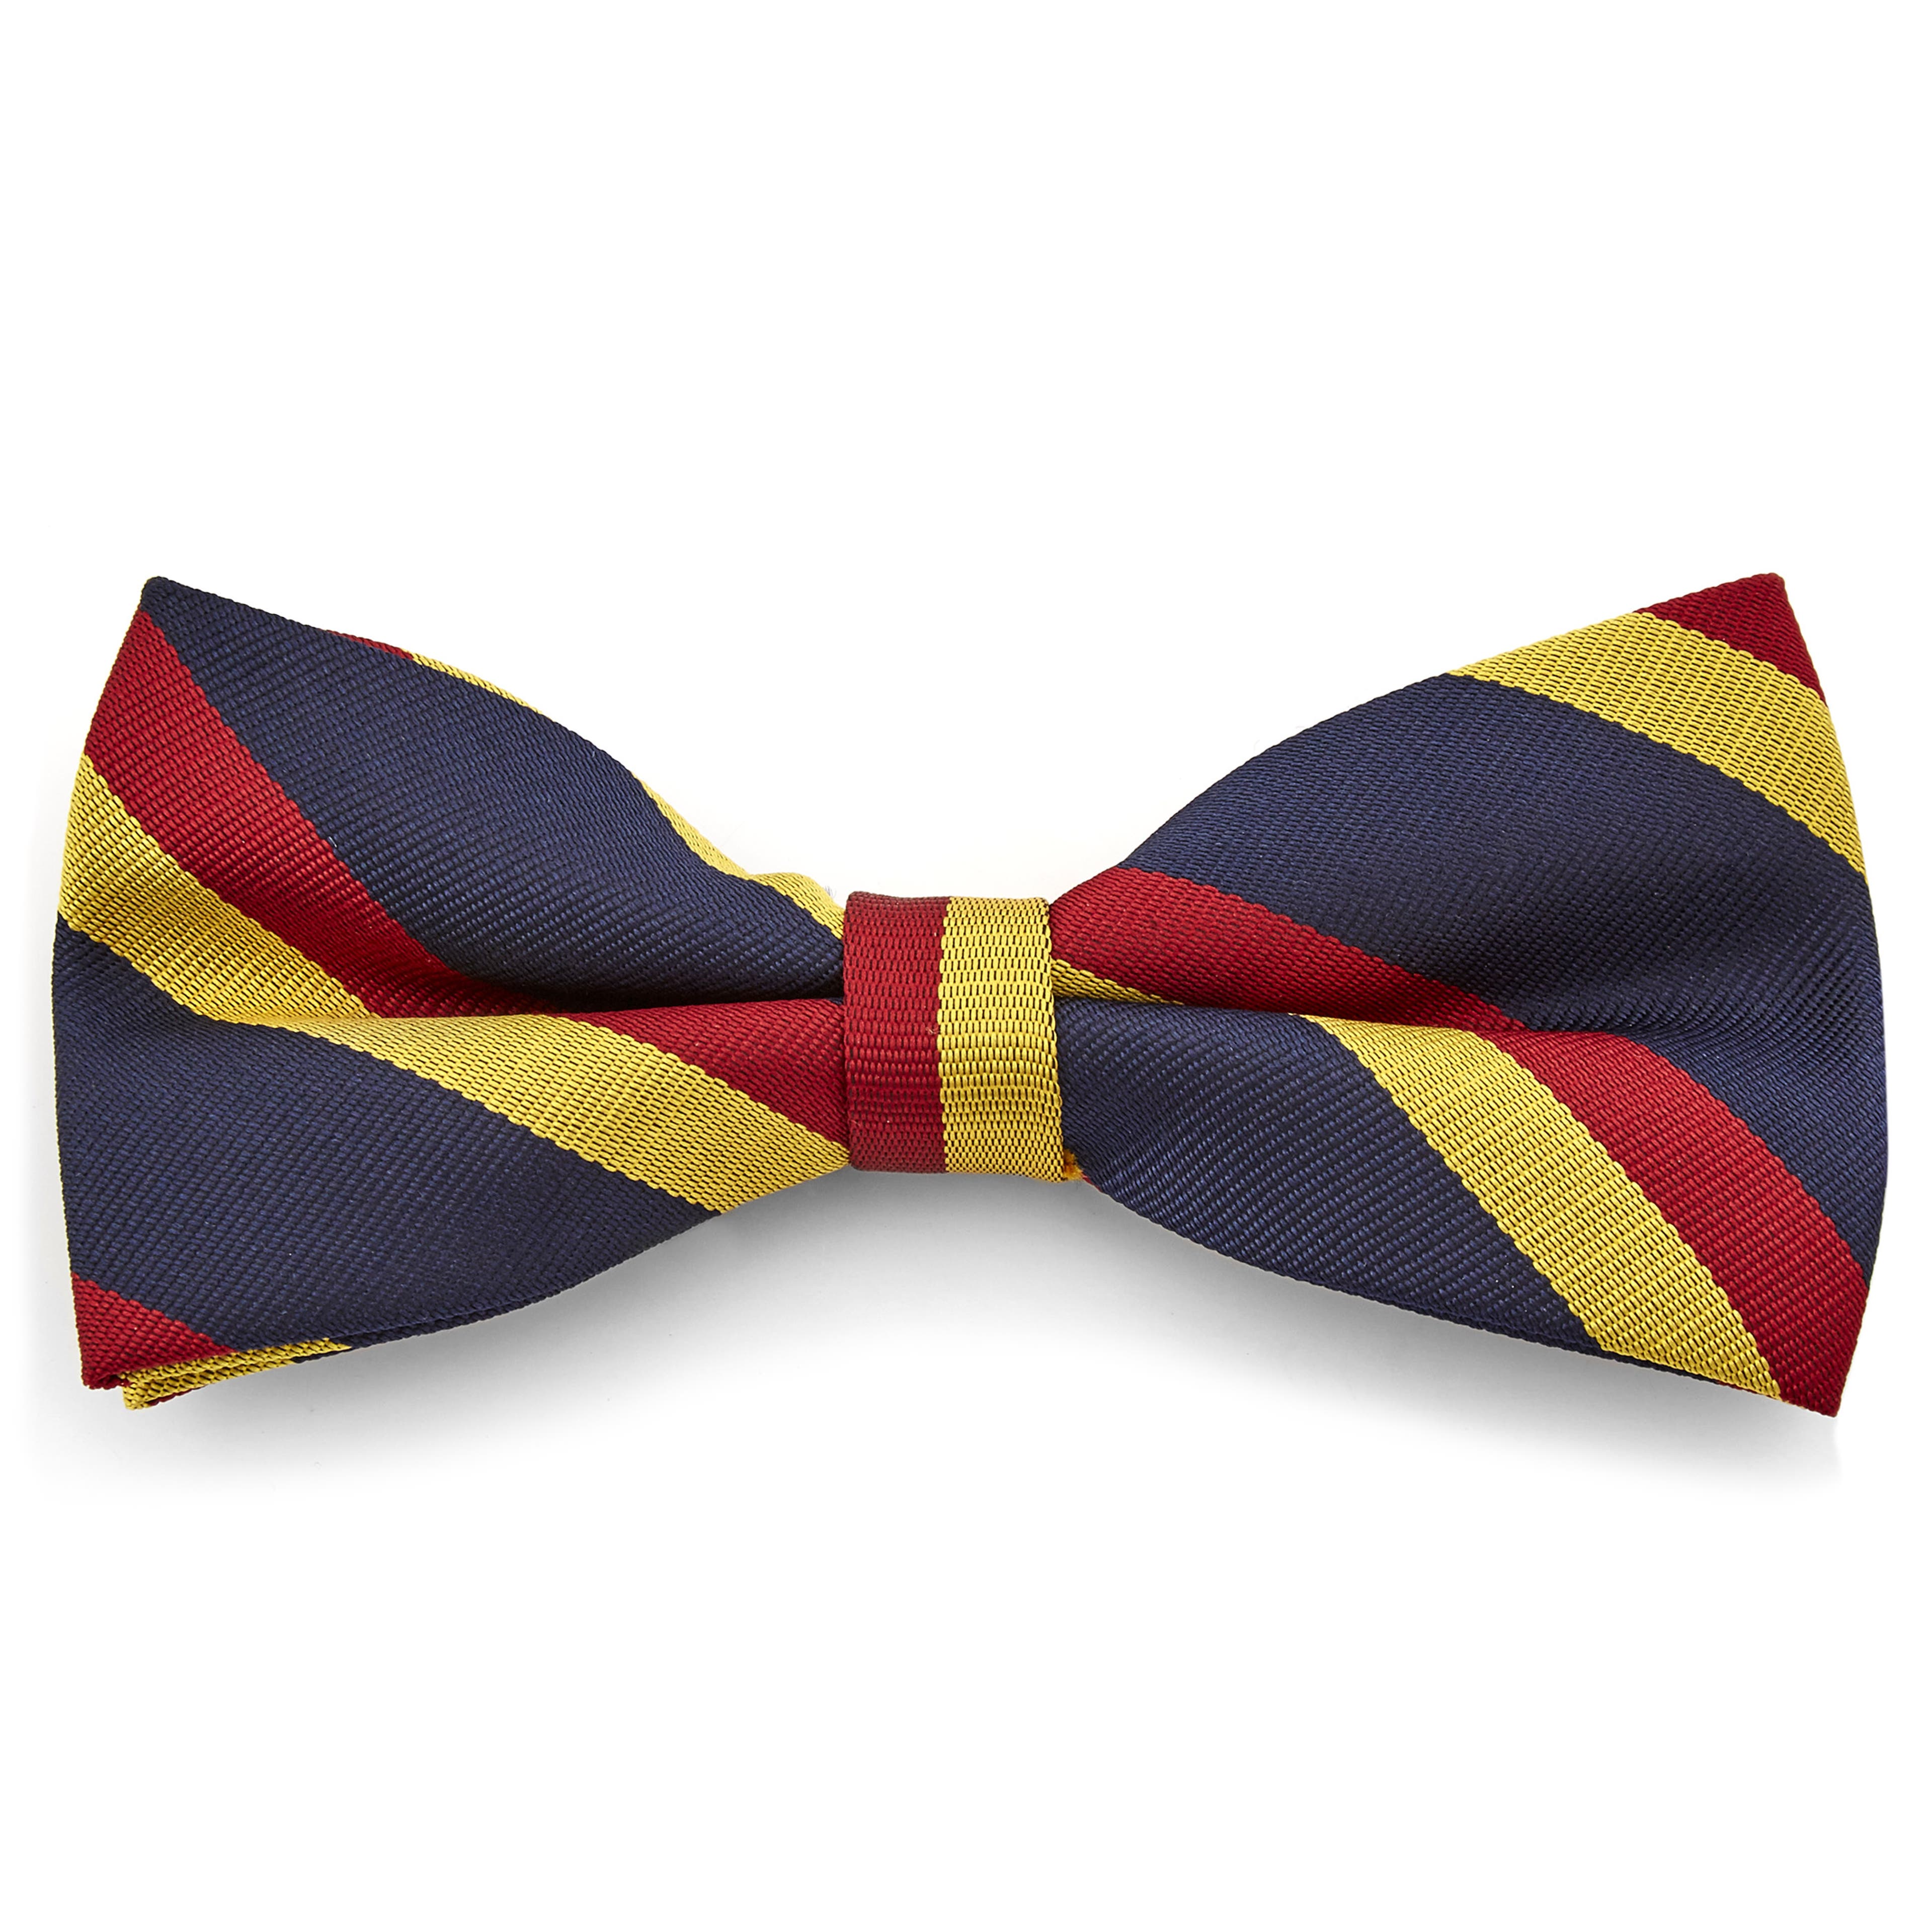 Blue, Red & Gold Striped Pre-Tied Bow Tie